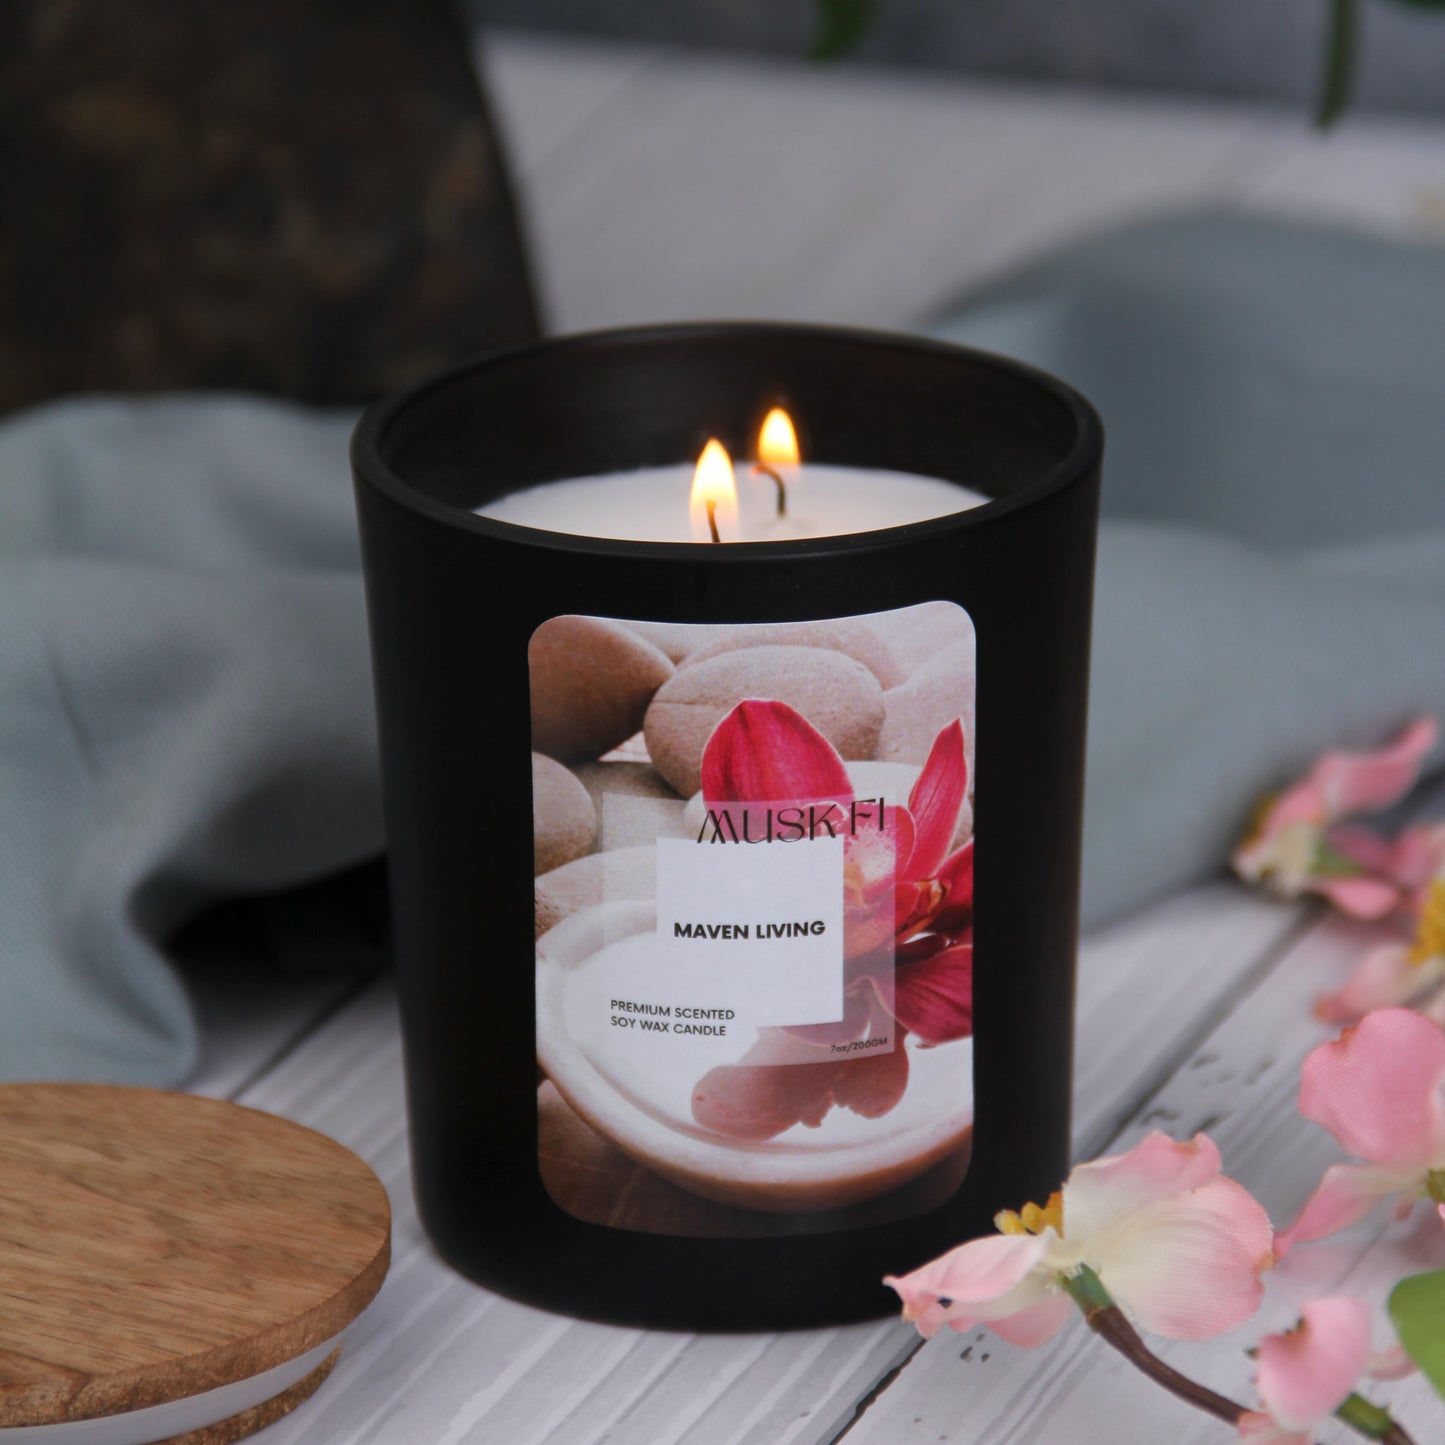 Musk scented candles